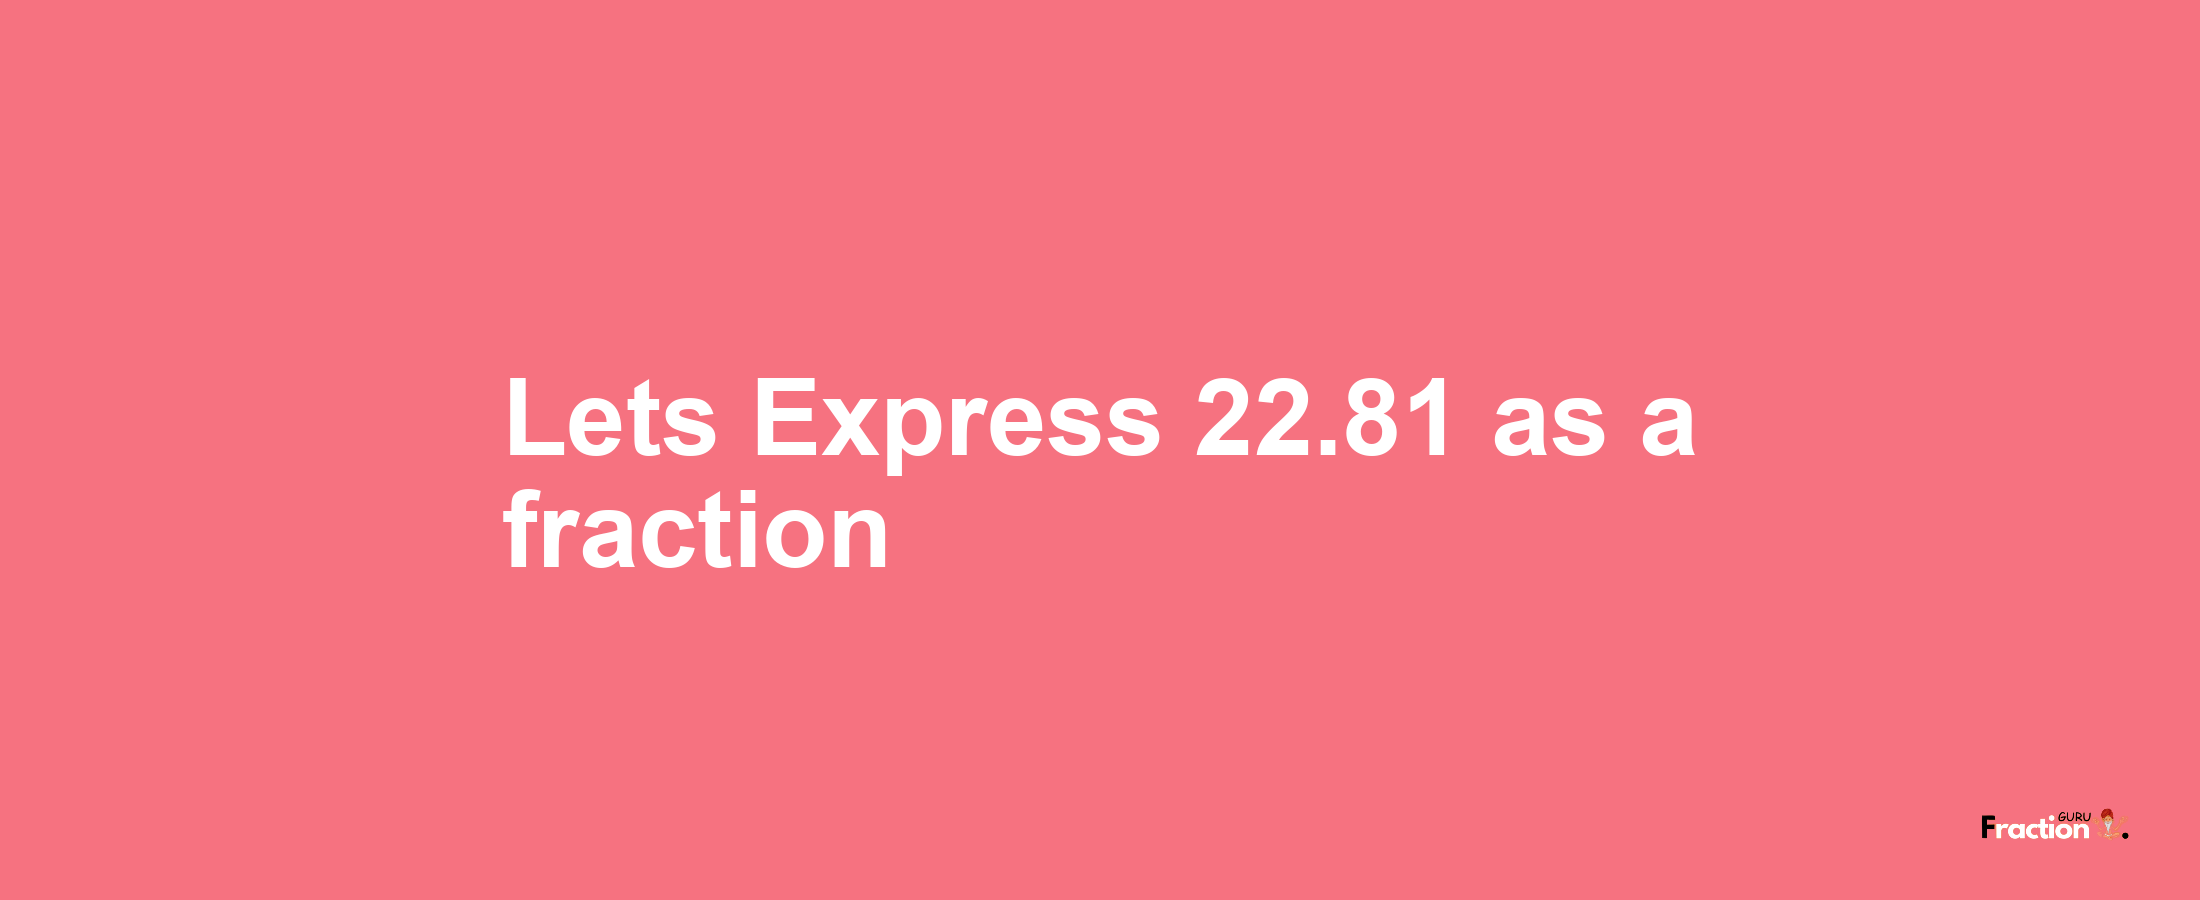 Lets Express 22.81 as afraction